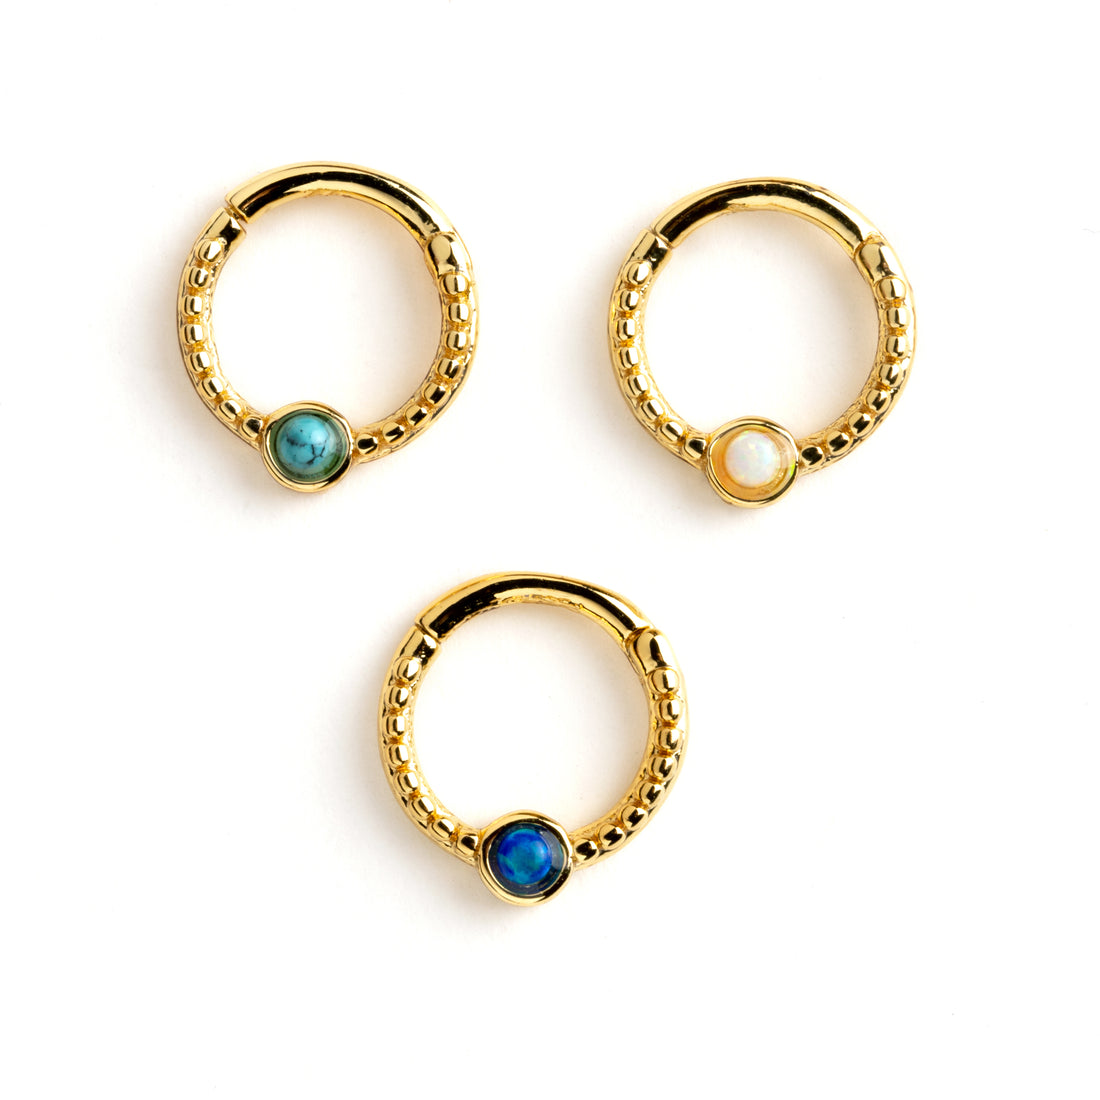 Dayaa gold surgical steel septum clicker with blue opal, white opal and turquoise frontal view